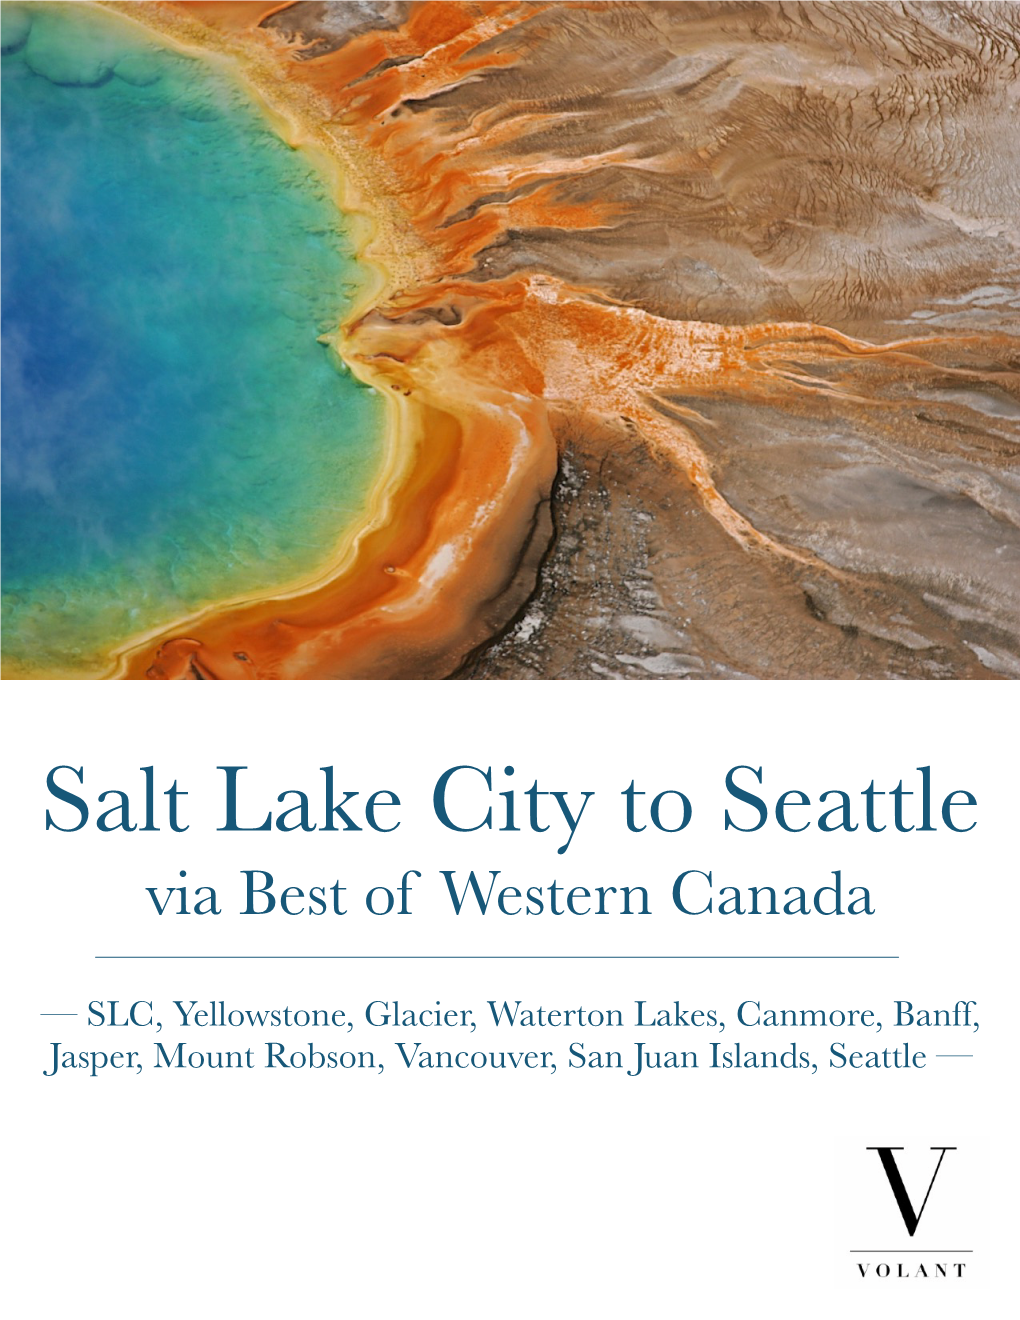 Salt Lake City to Seattle Via Best of Canada - 16 Days / 15 Nights Itinerary